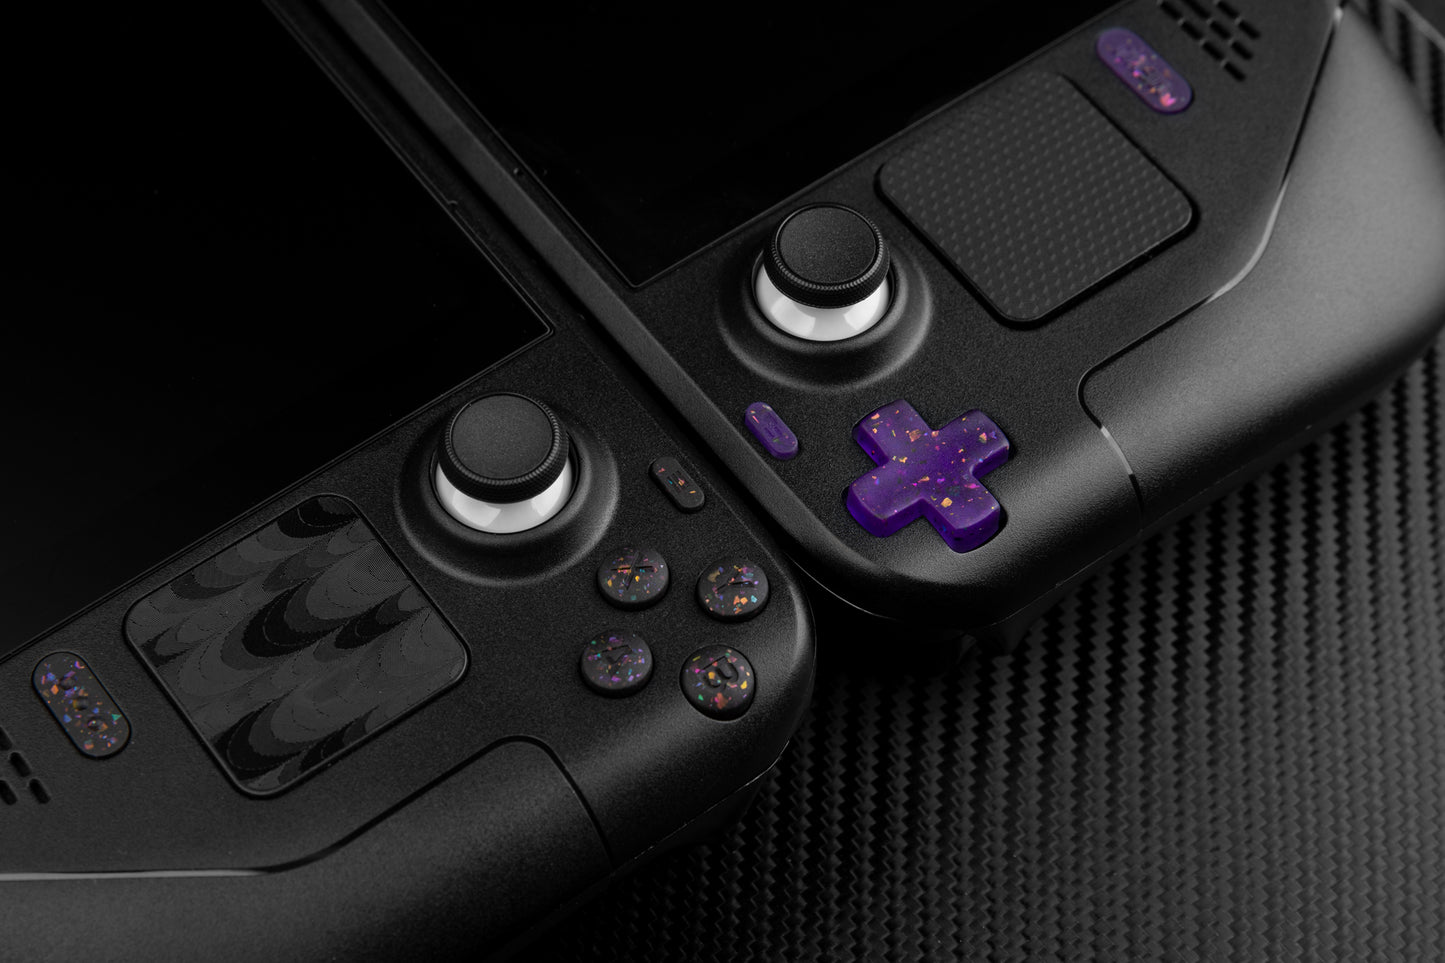 two steam decks side by side with party black and party purple buttons installed